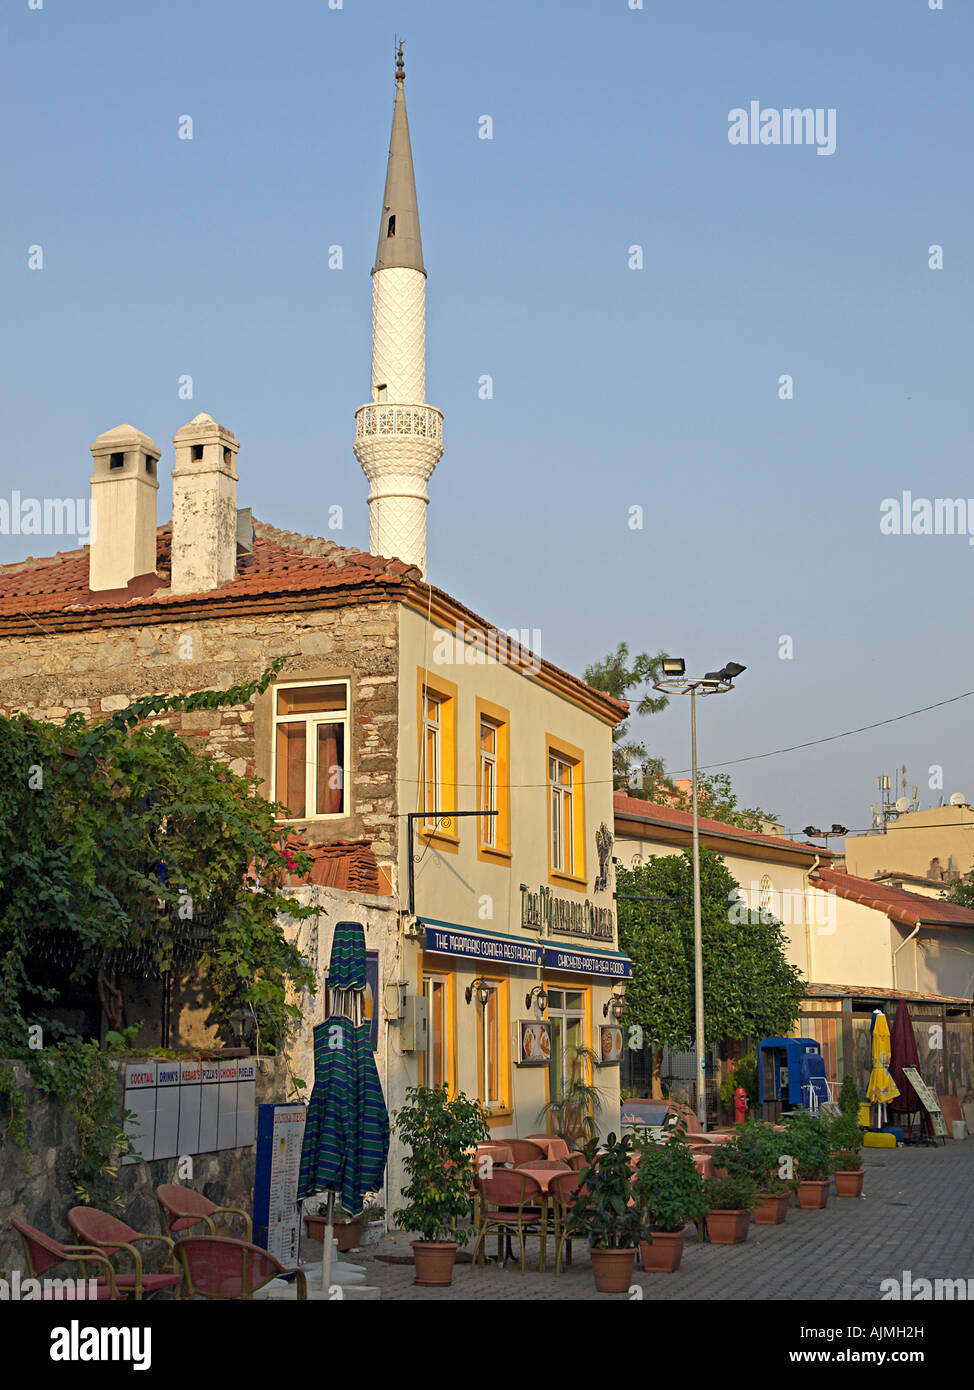 CAFE BAR OLD TOWN MARMARIS WITH  MINARET OVERLOOKING AT THE REAR, MUGLA TURKEY Stock Photo